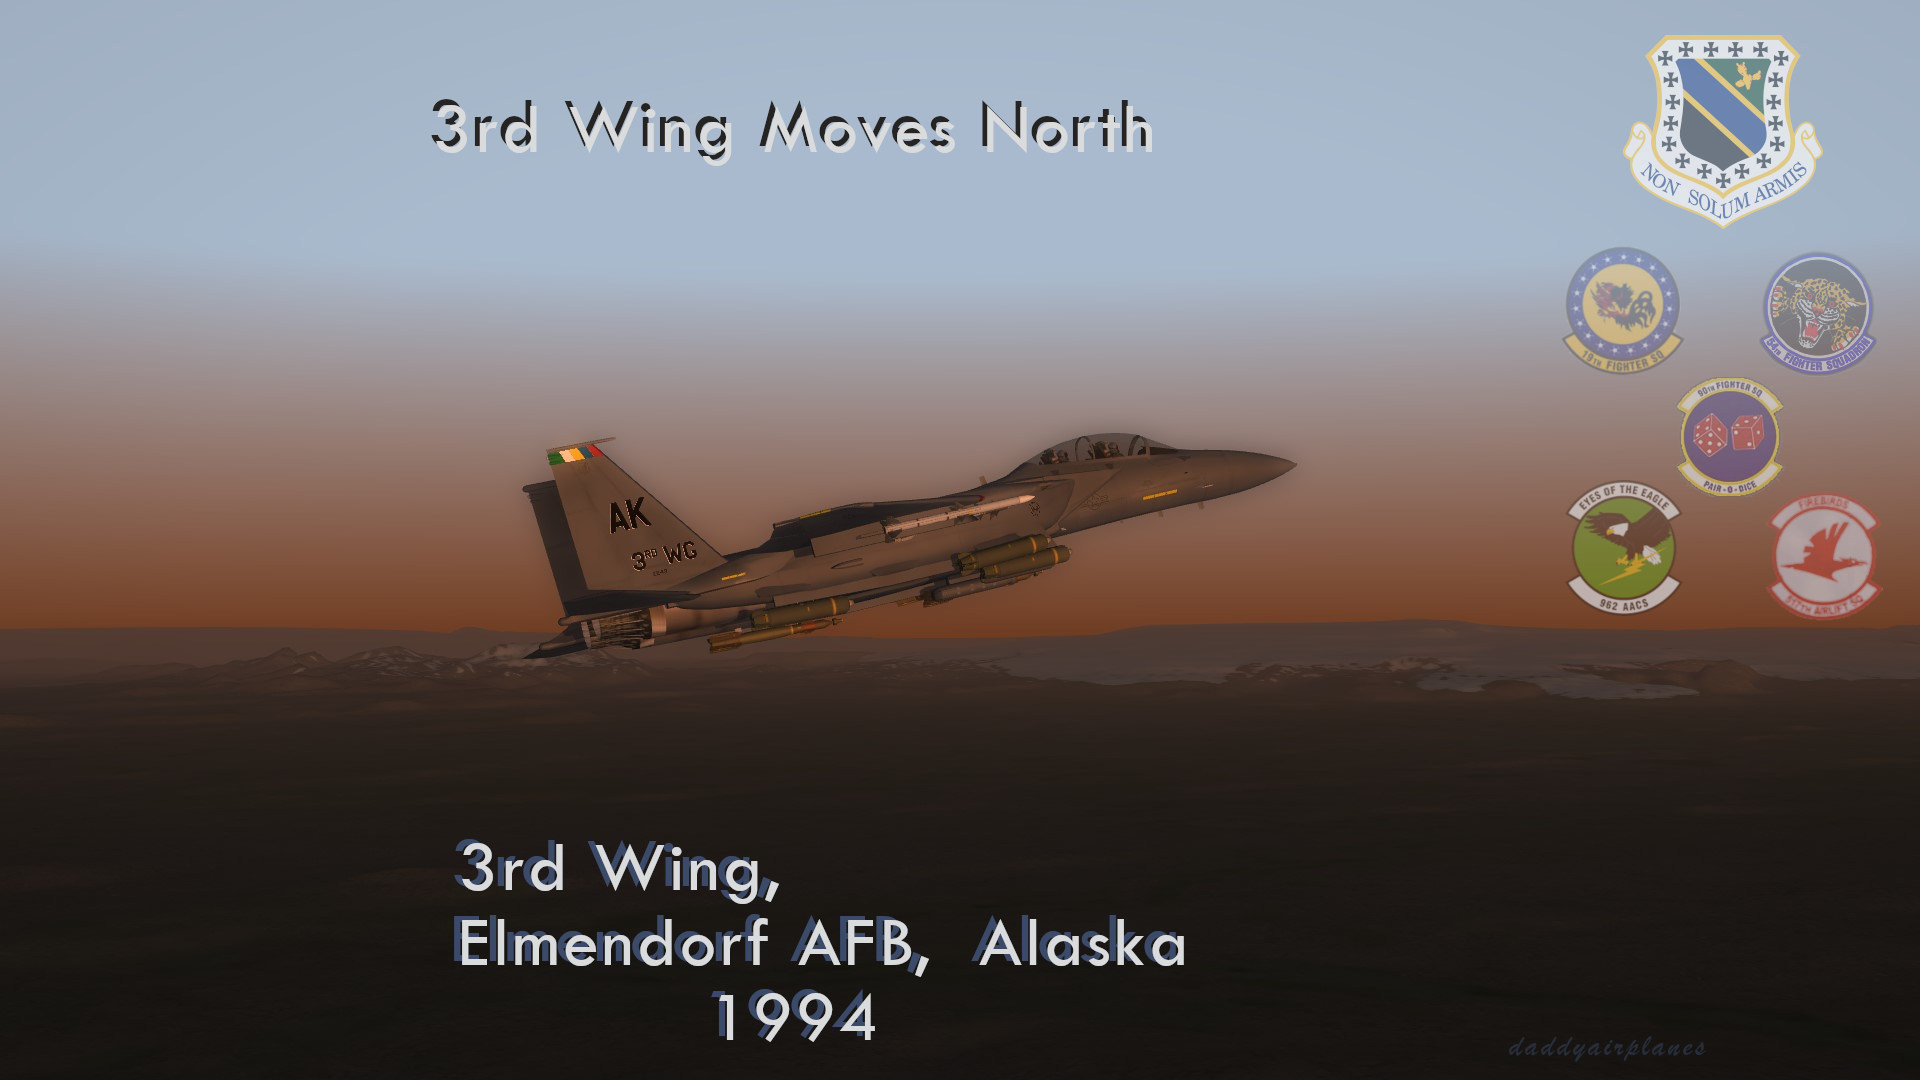 3rd Wing Moves North